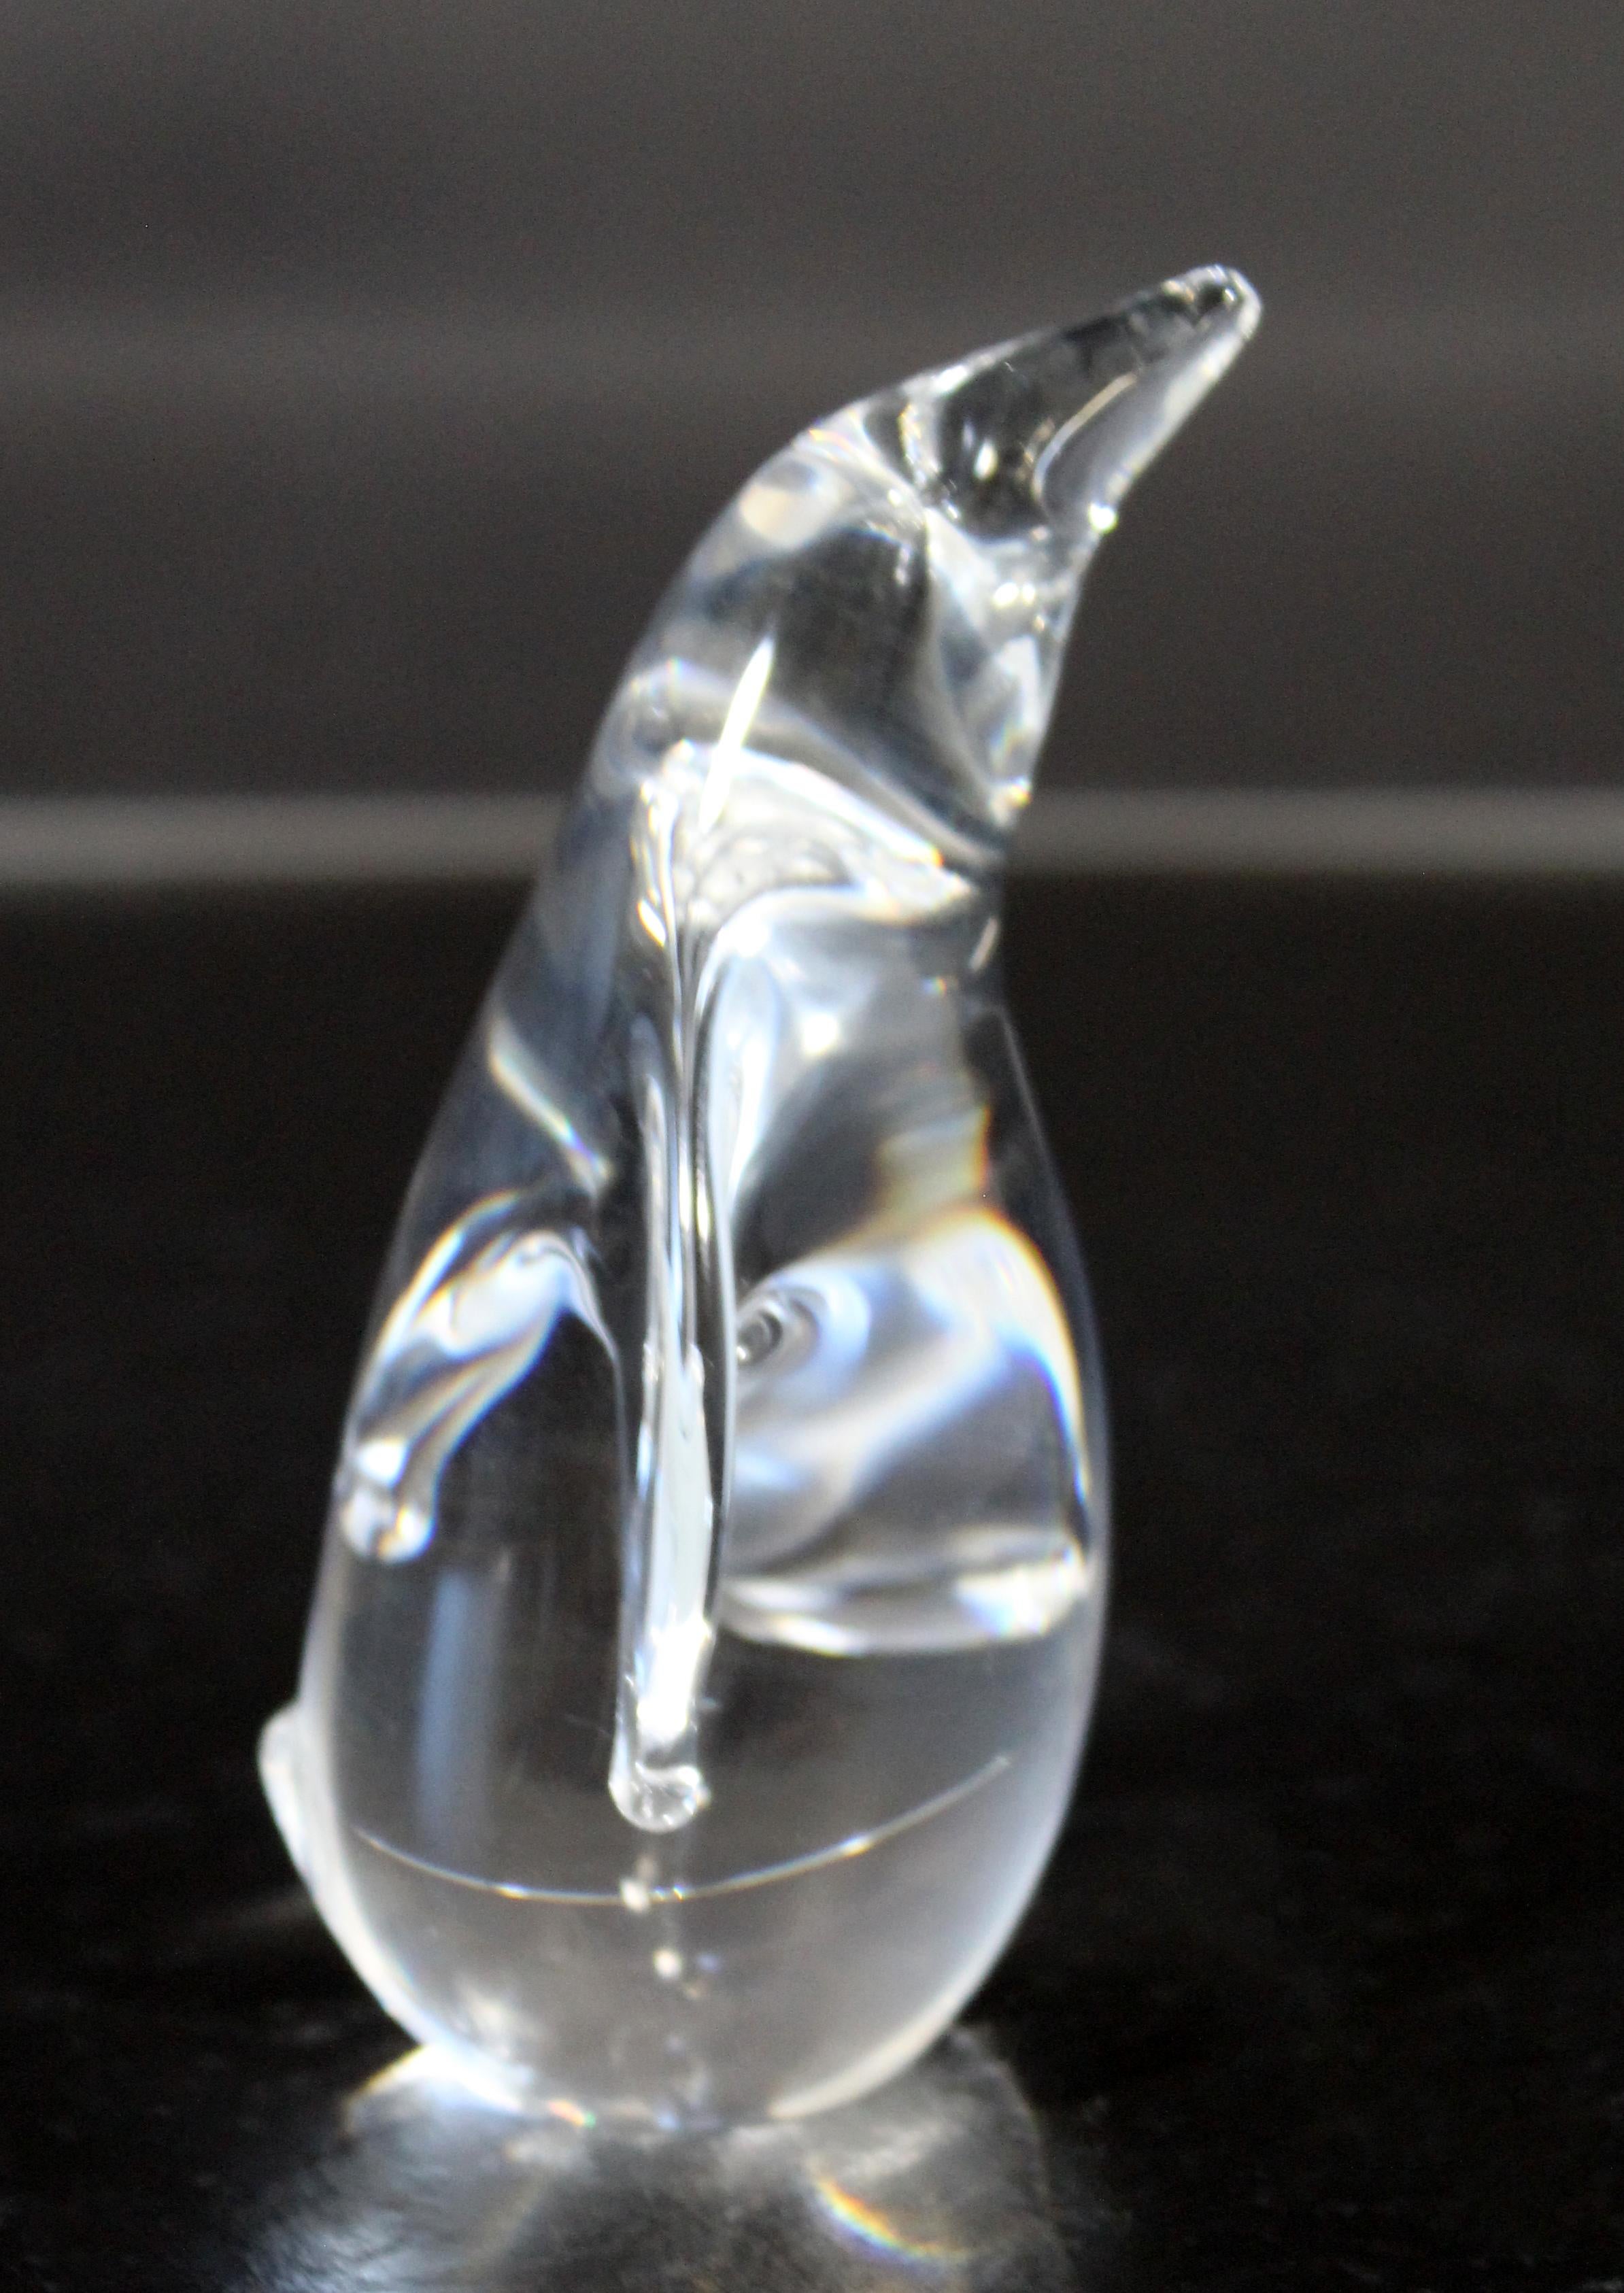 For your consideration is an petite, Steuben signed, glass penguin statuette sculpture. In excellent condition. The dimensions are 2.4